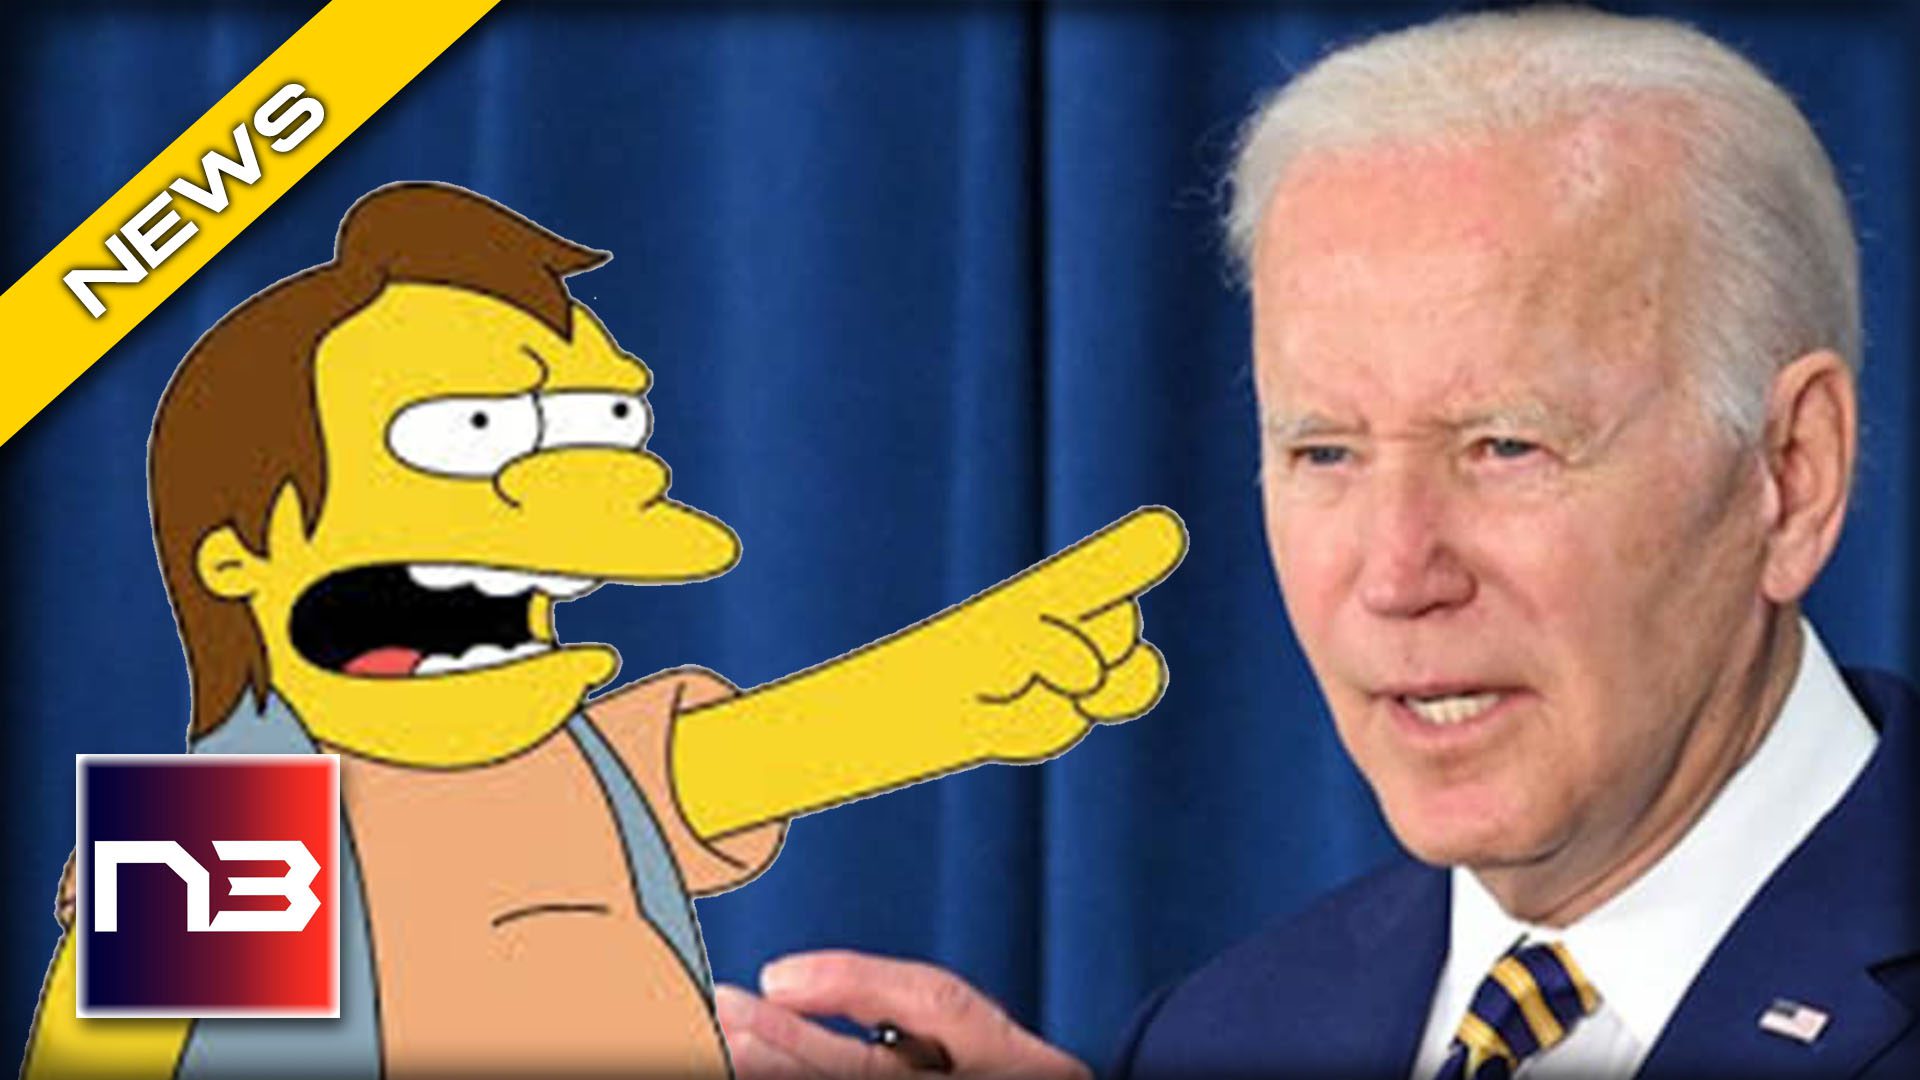 RELENTLESS: Biden Continues To Divide Nation After Seen Mocking Republicans